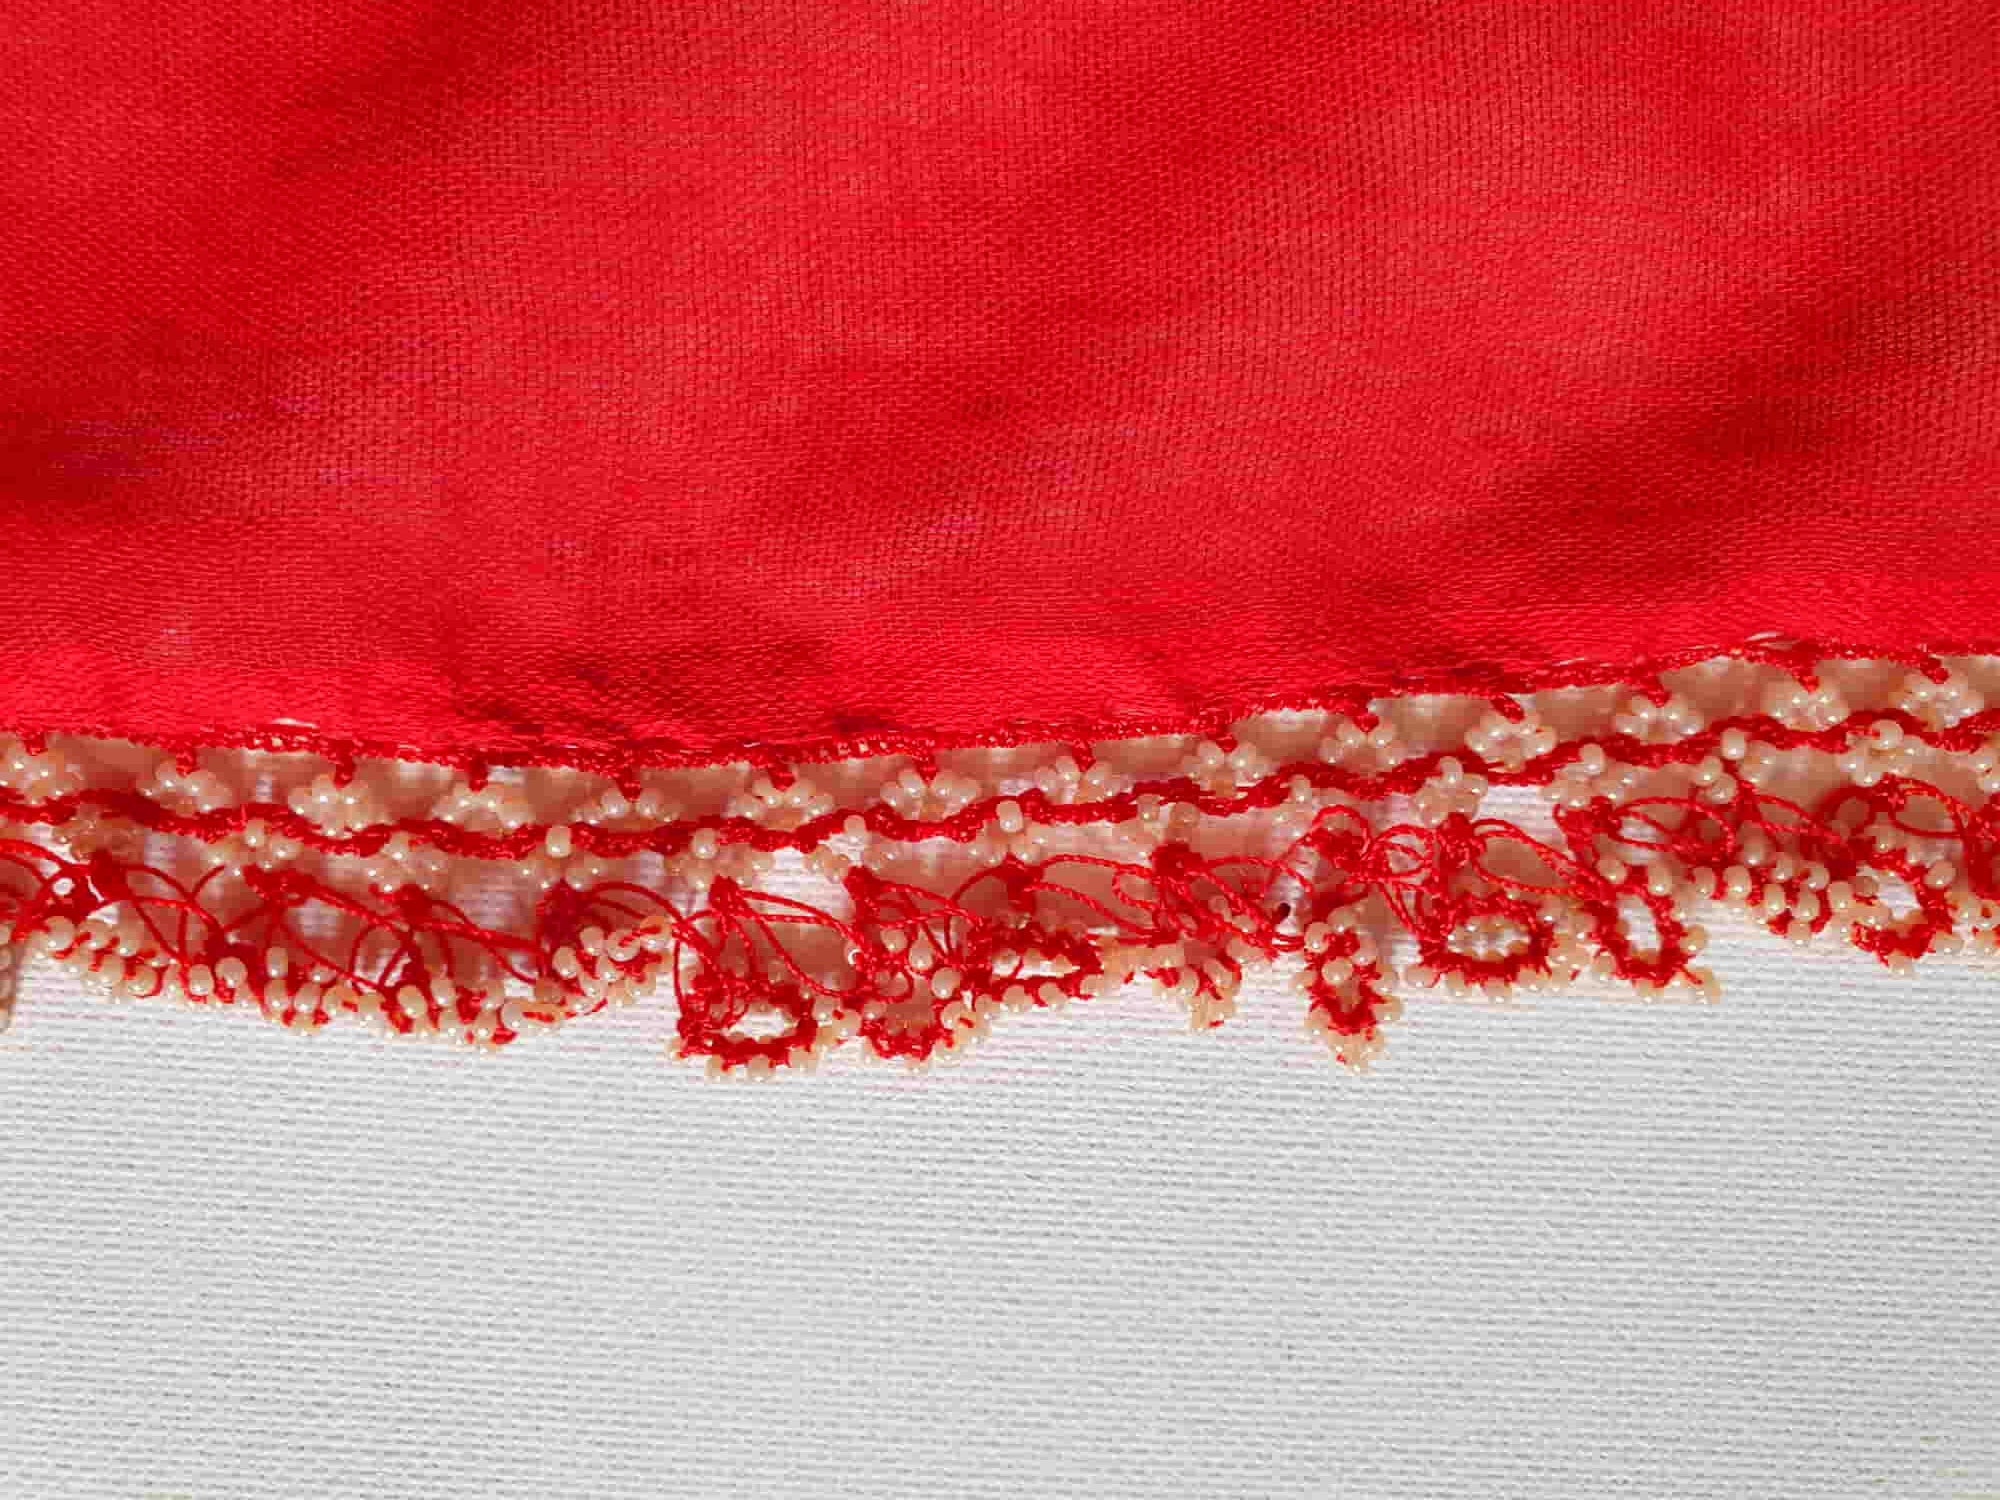 vintage square red scarf with pearl bead fringe